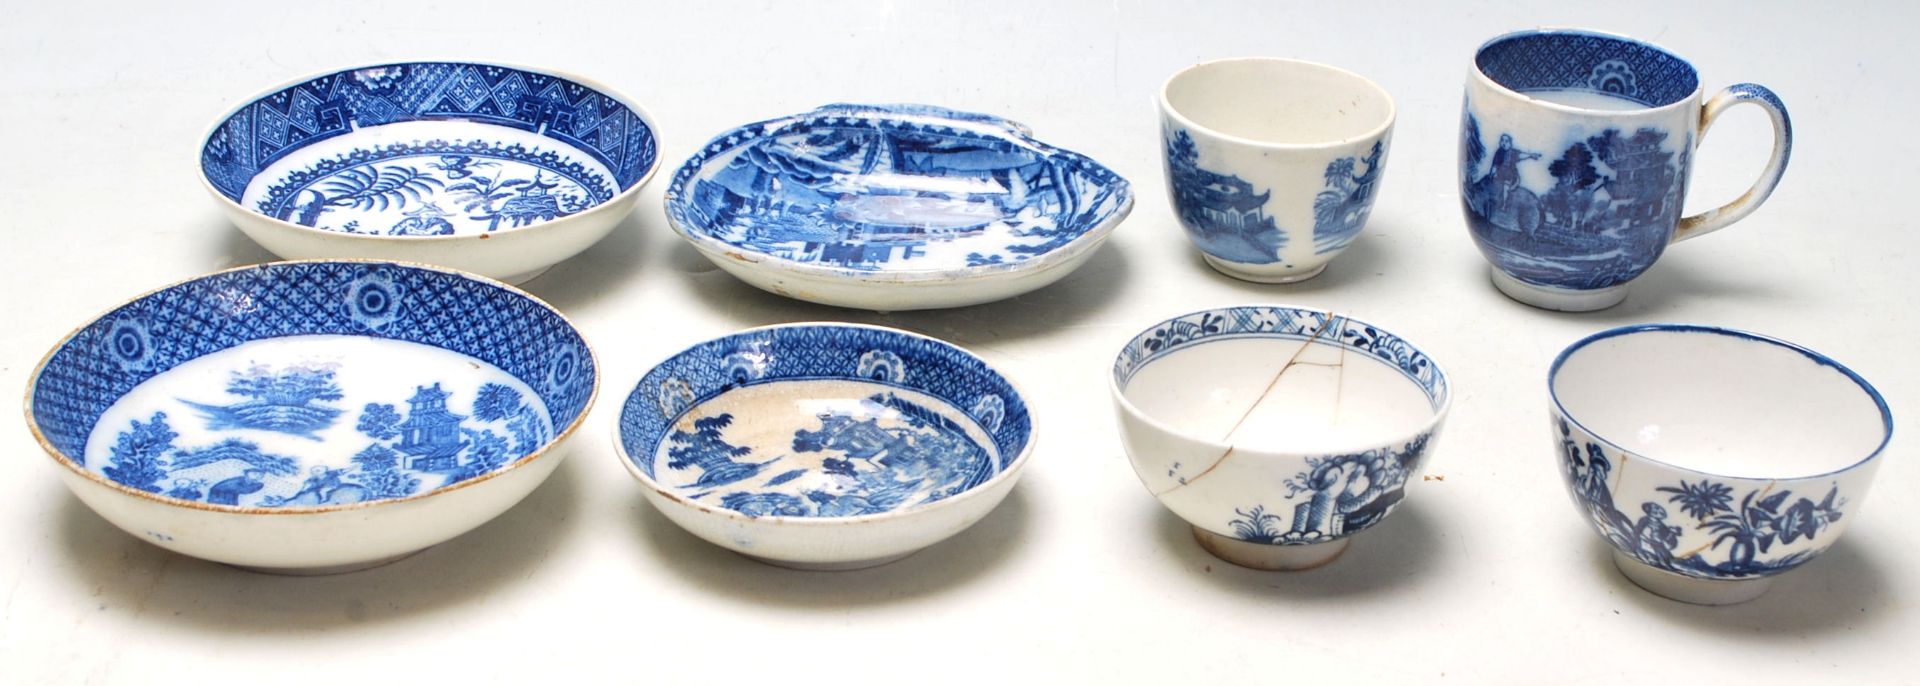 A good collection of 19th century or later English blue and white Chinese ceramics to include